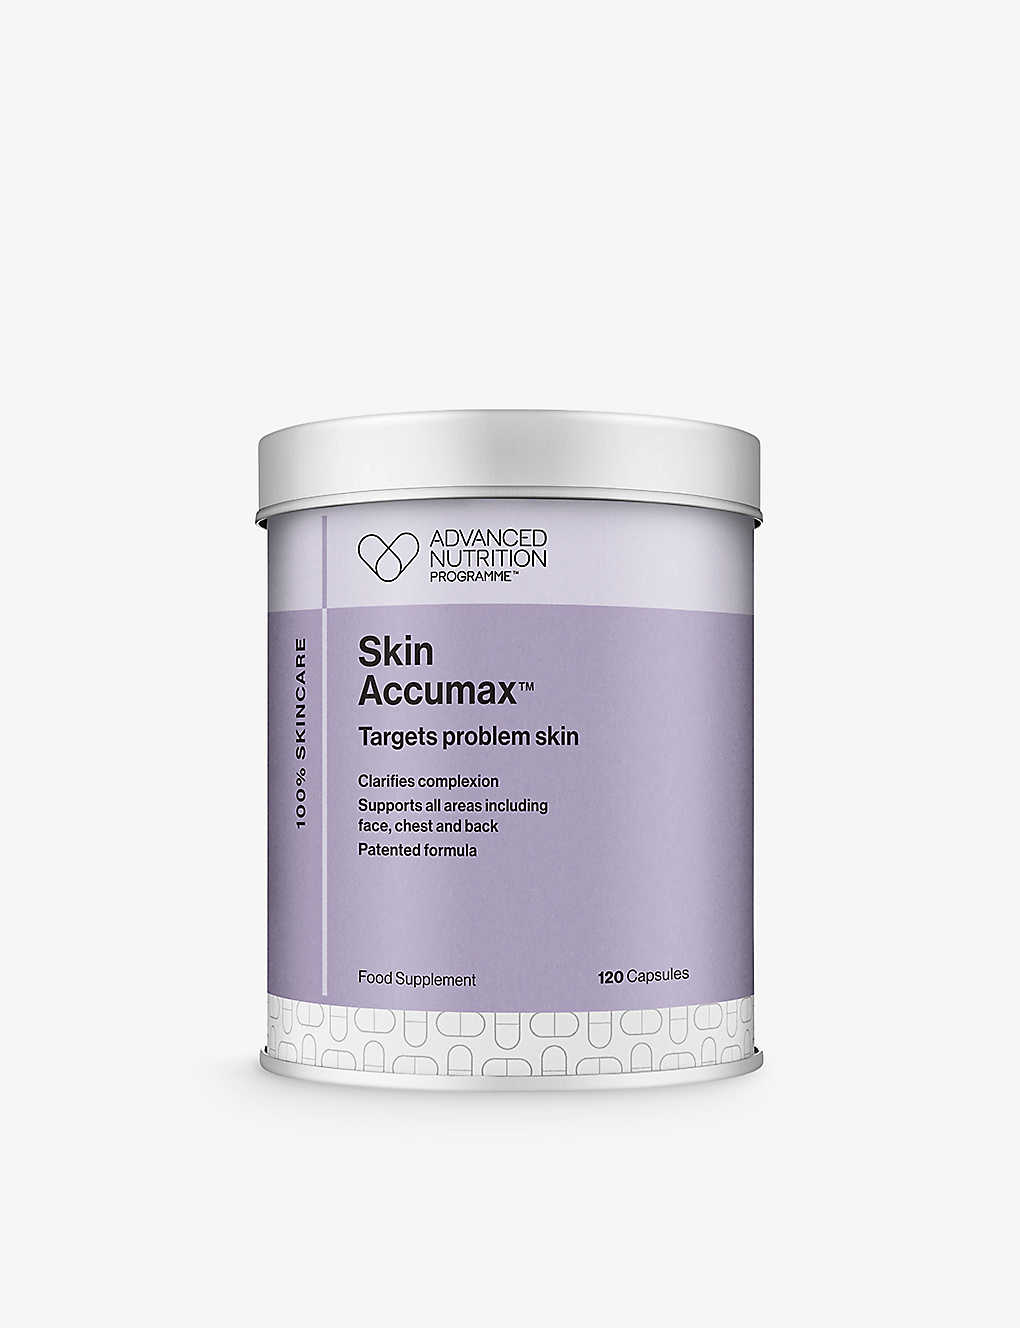 Advanced Nutrition Programme Skin Accumax™ Supplement 120 Capsules